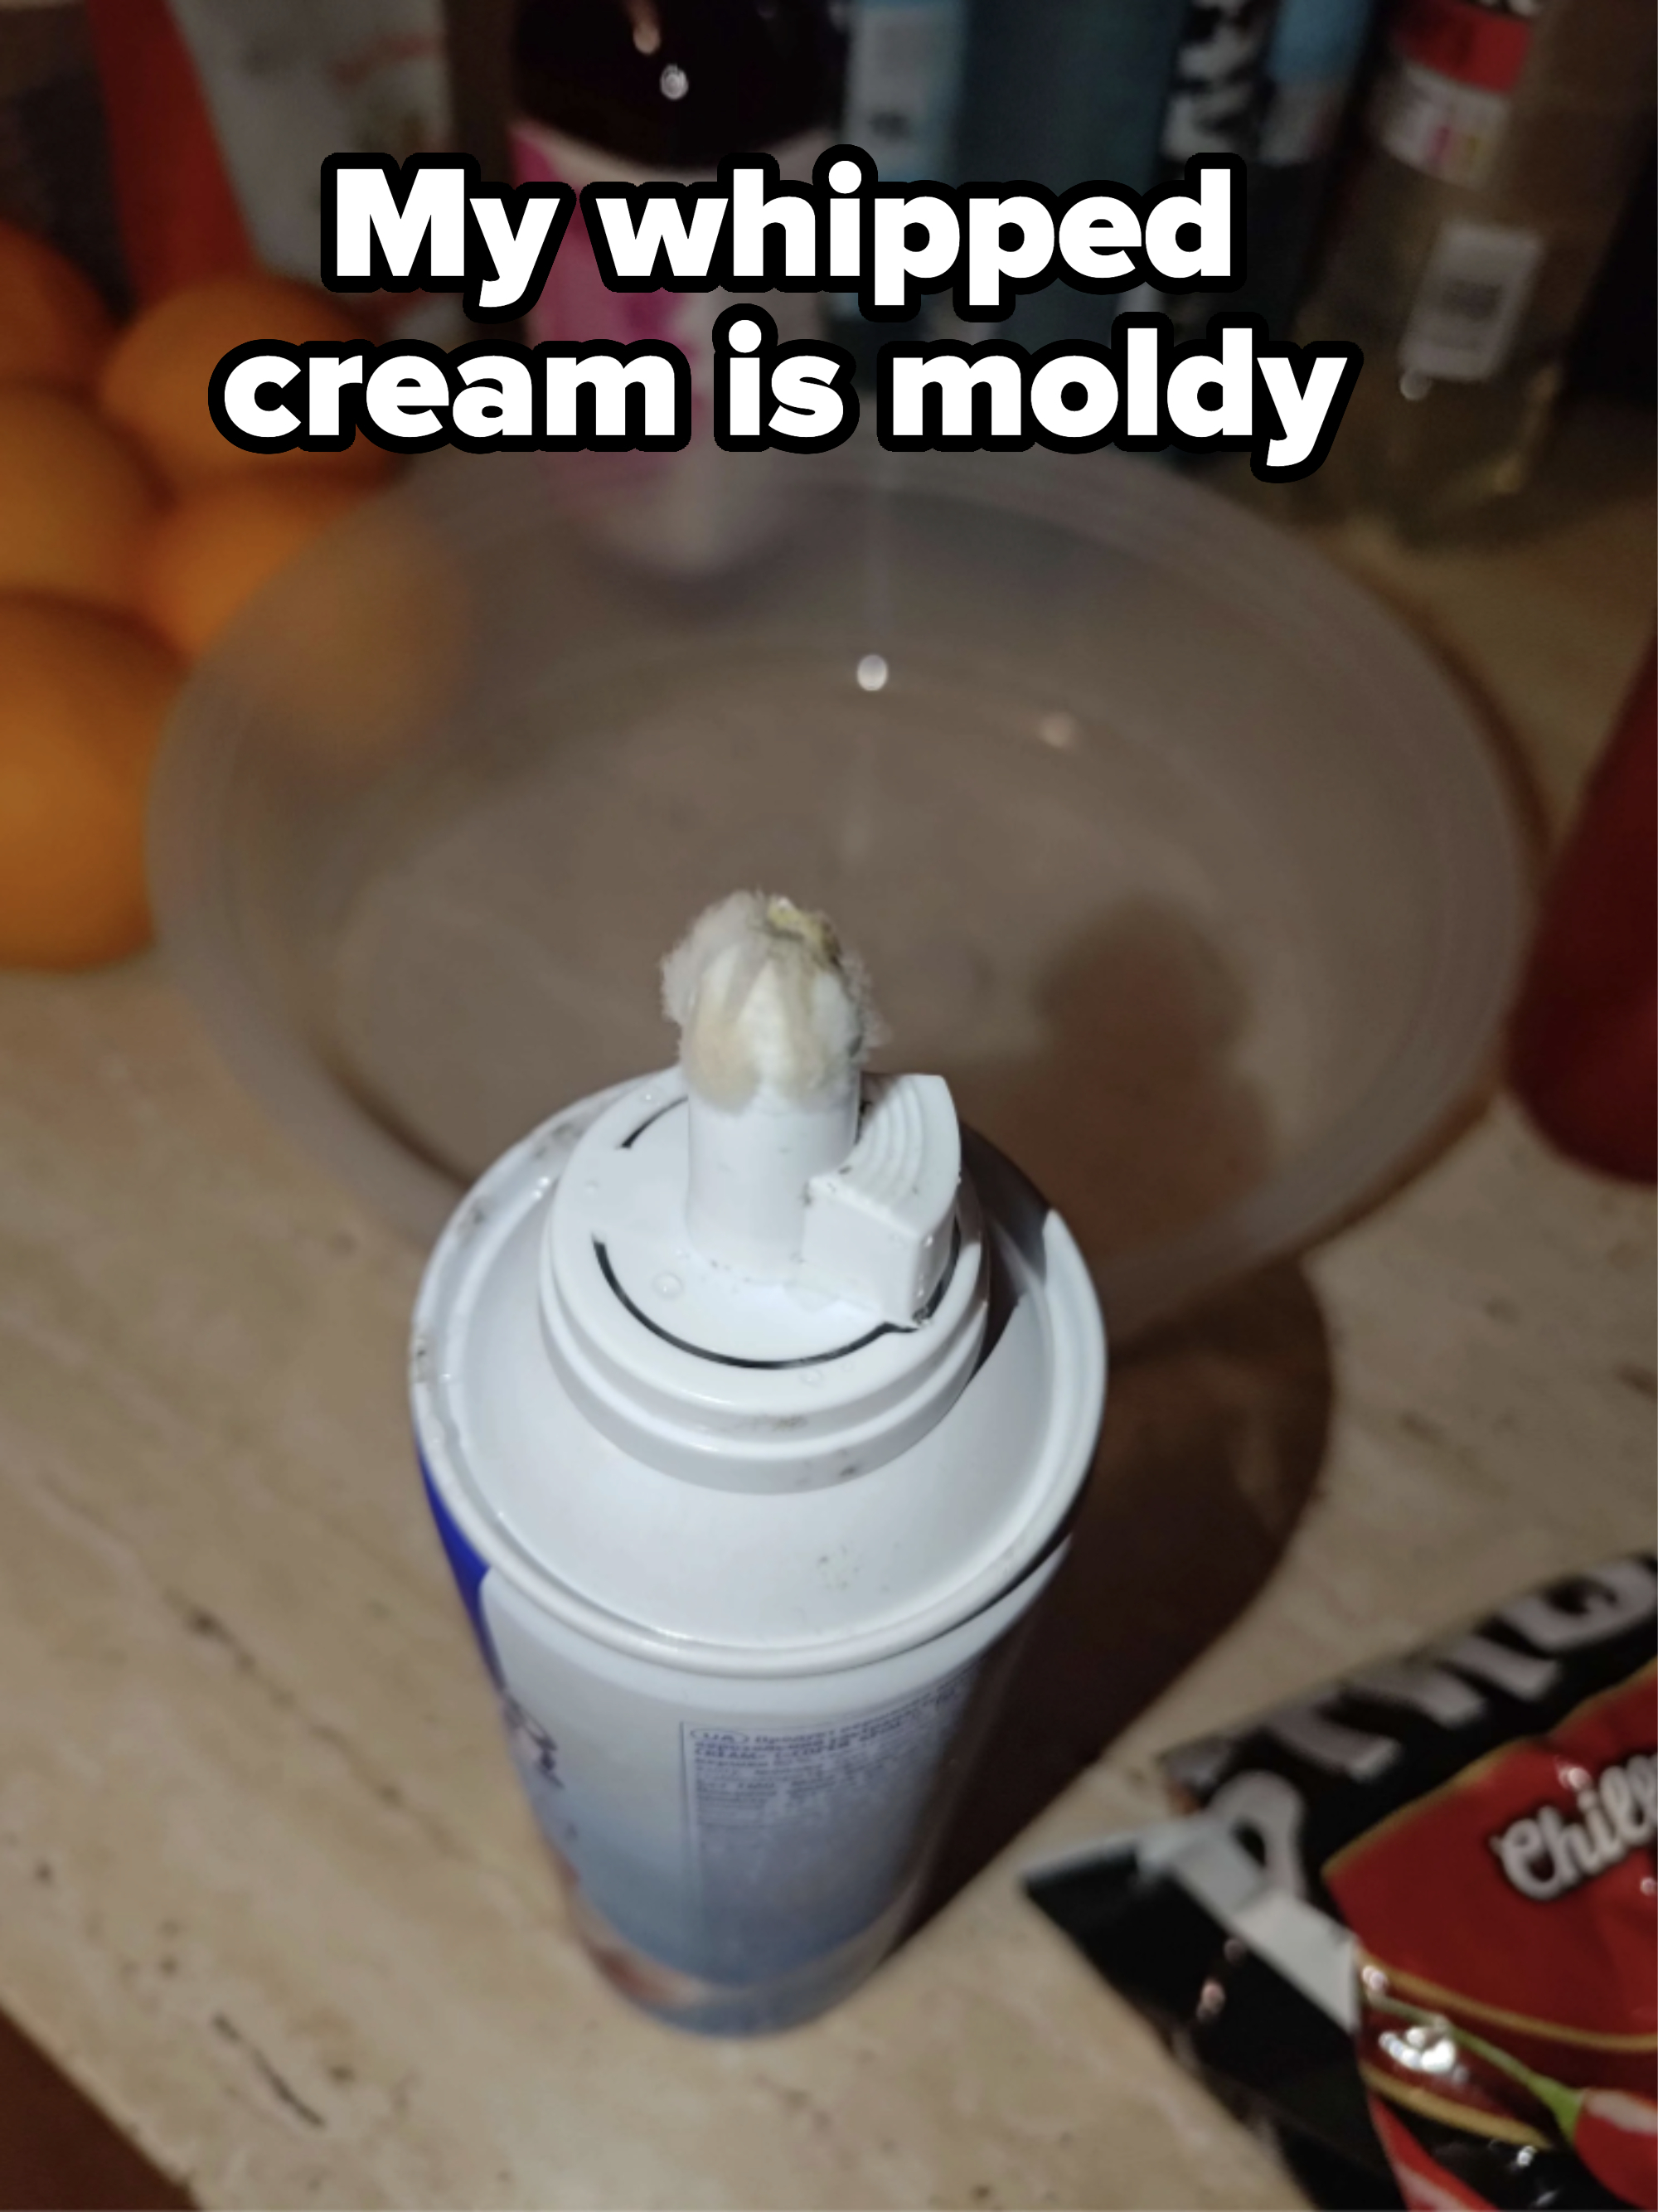 &quot;My whipped cream is moldy&quot;